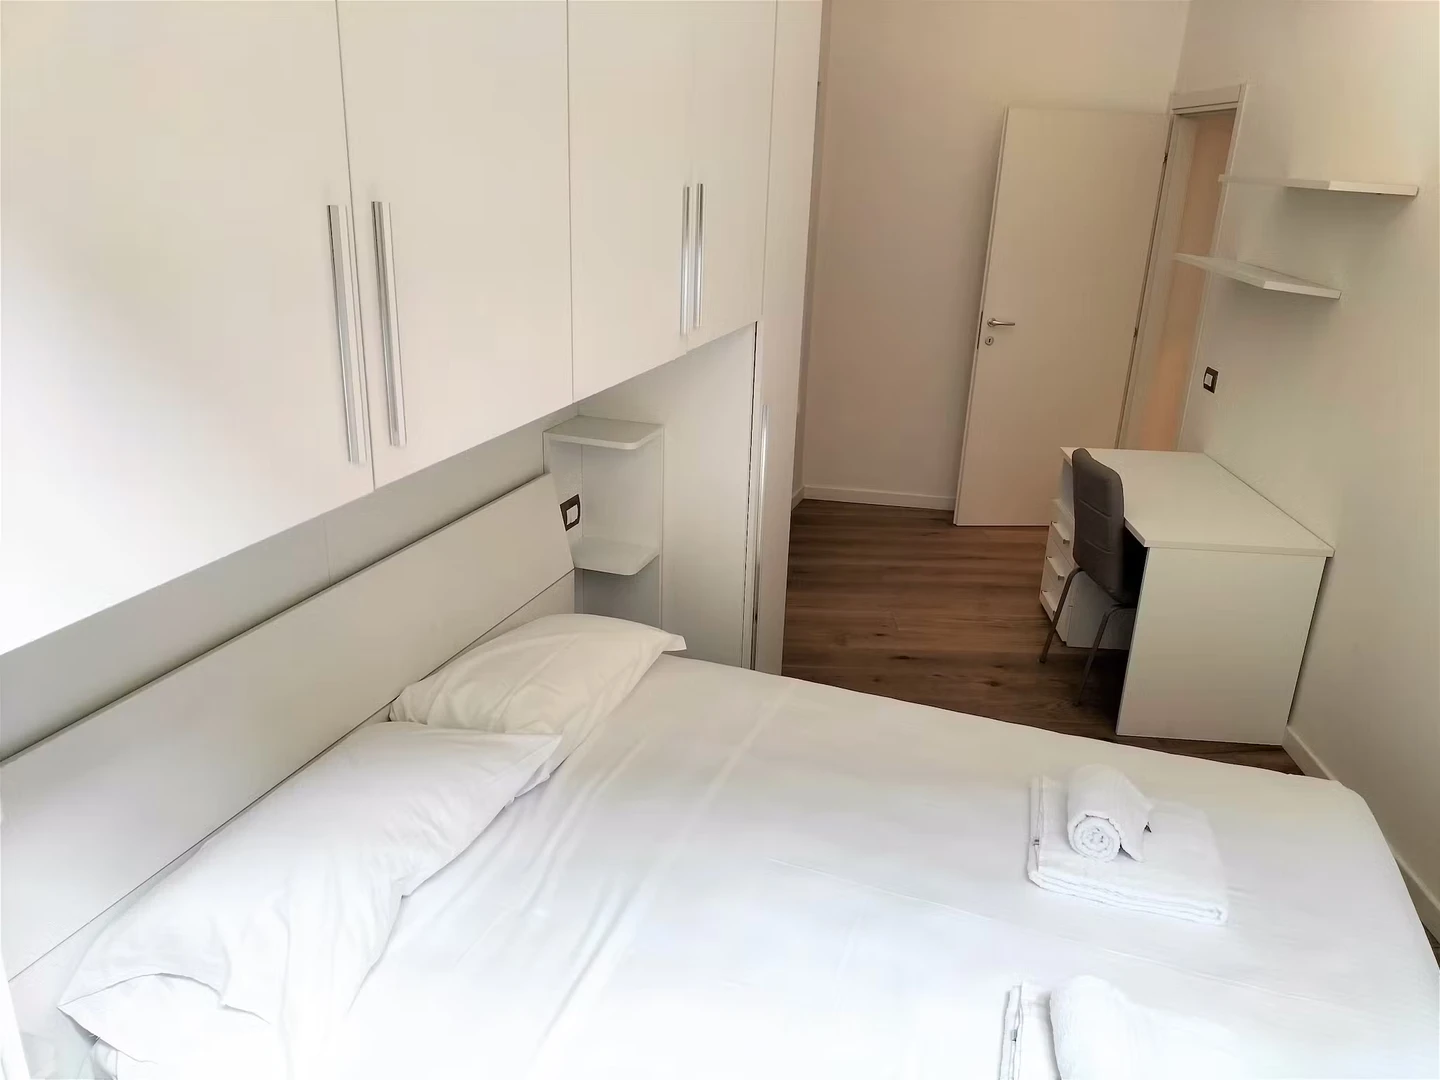 Accommodation in the centre of Florence